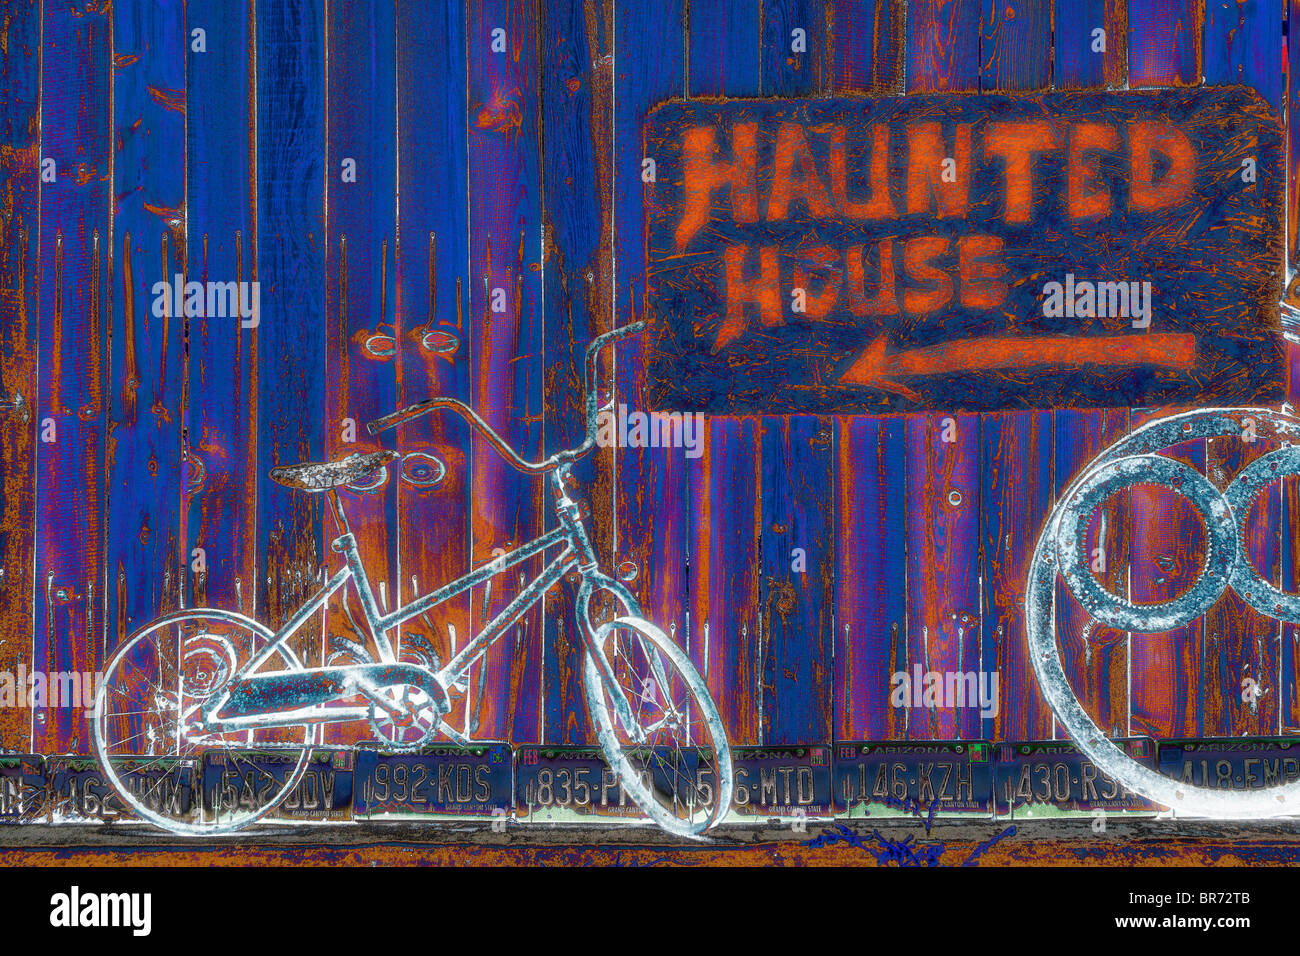 'Haunted house' and bicycles Stock Photo